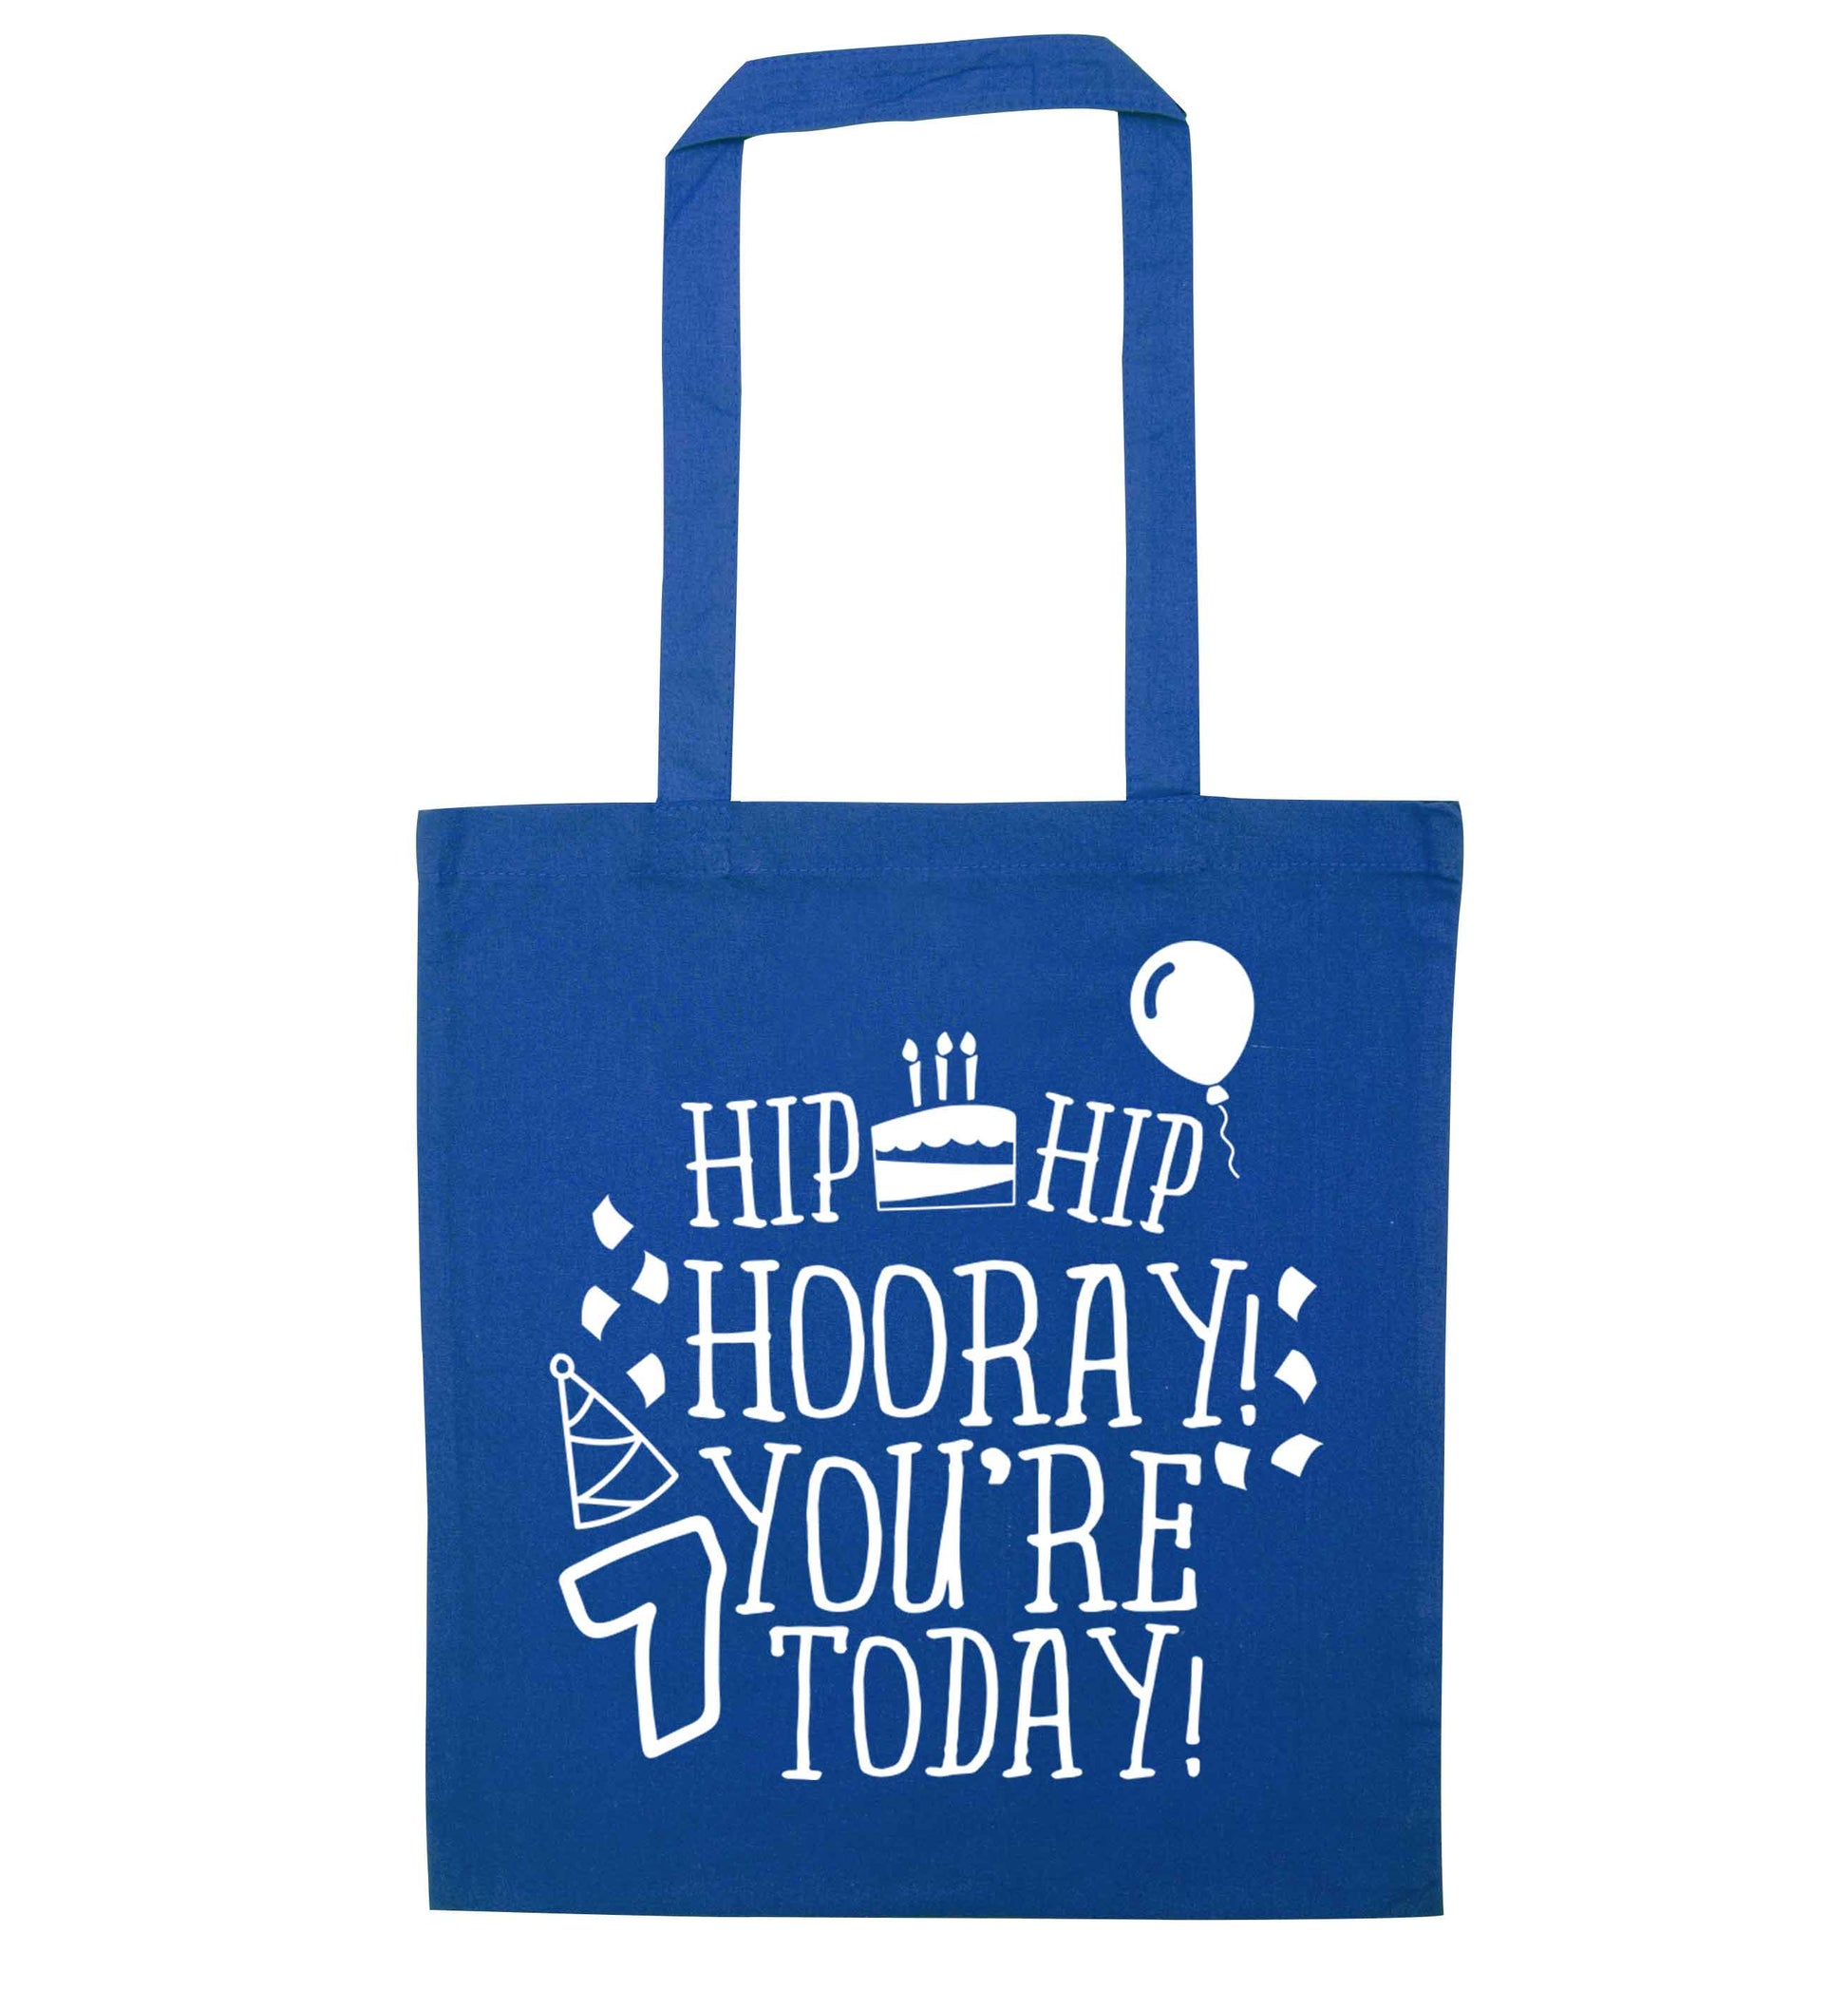 Hip hip hooray you're seven today! blue tote bag